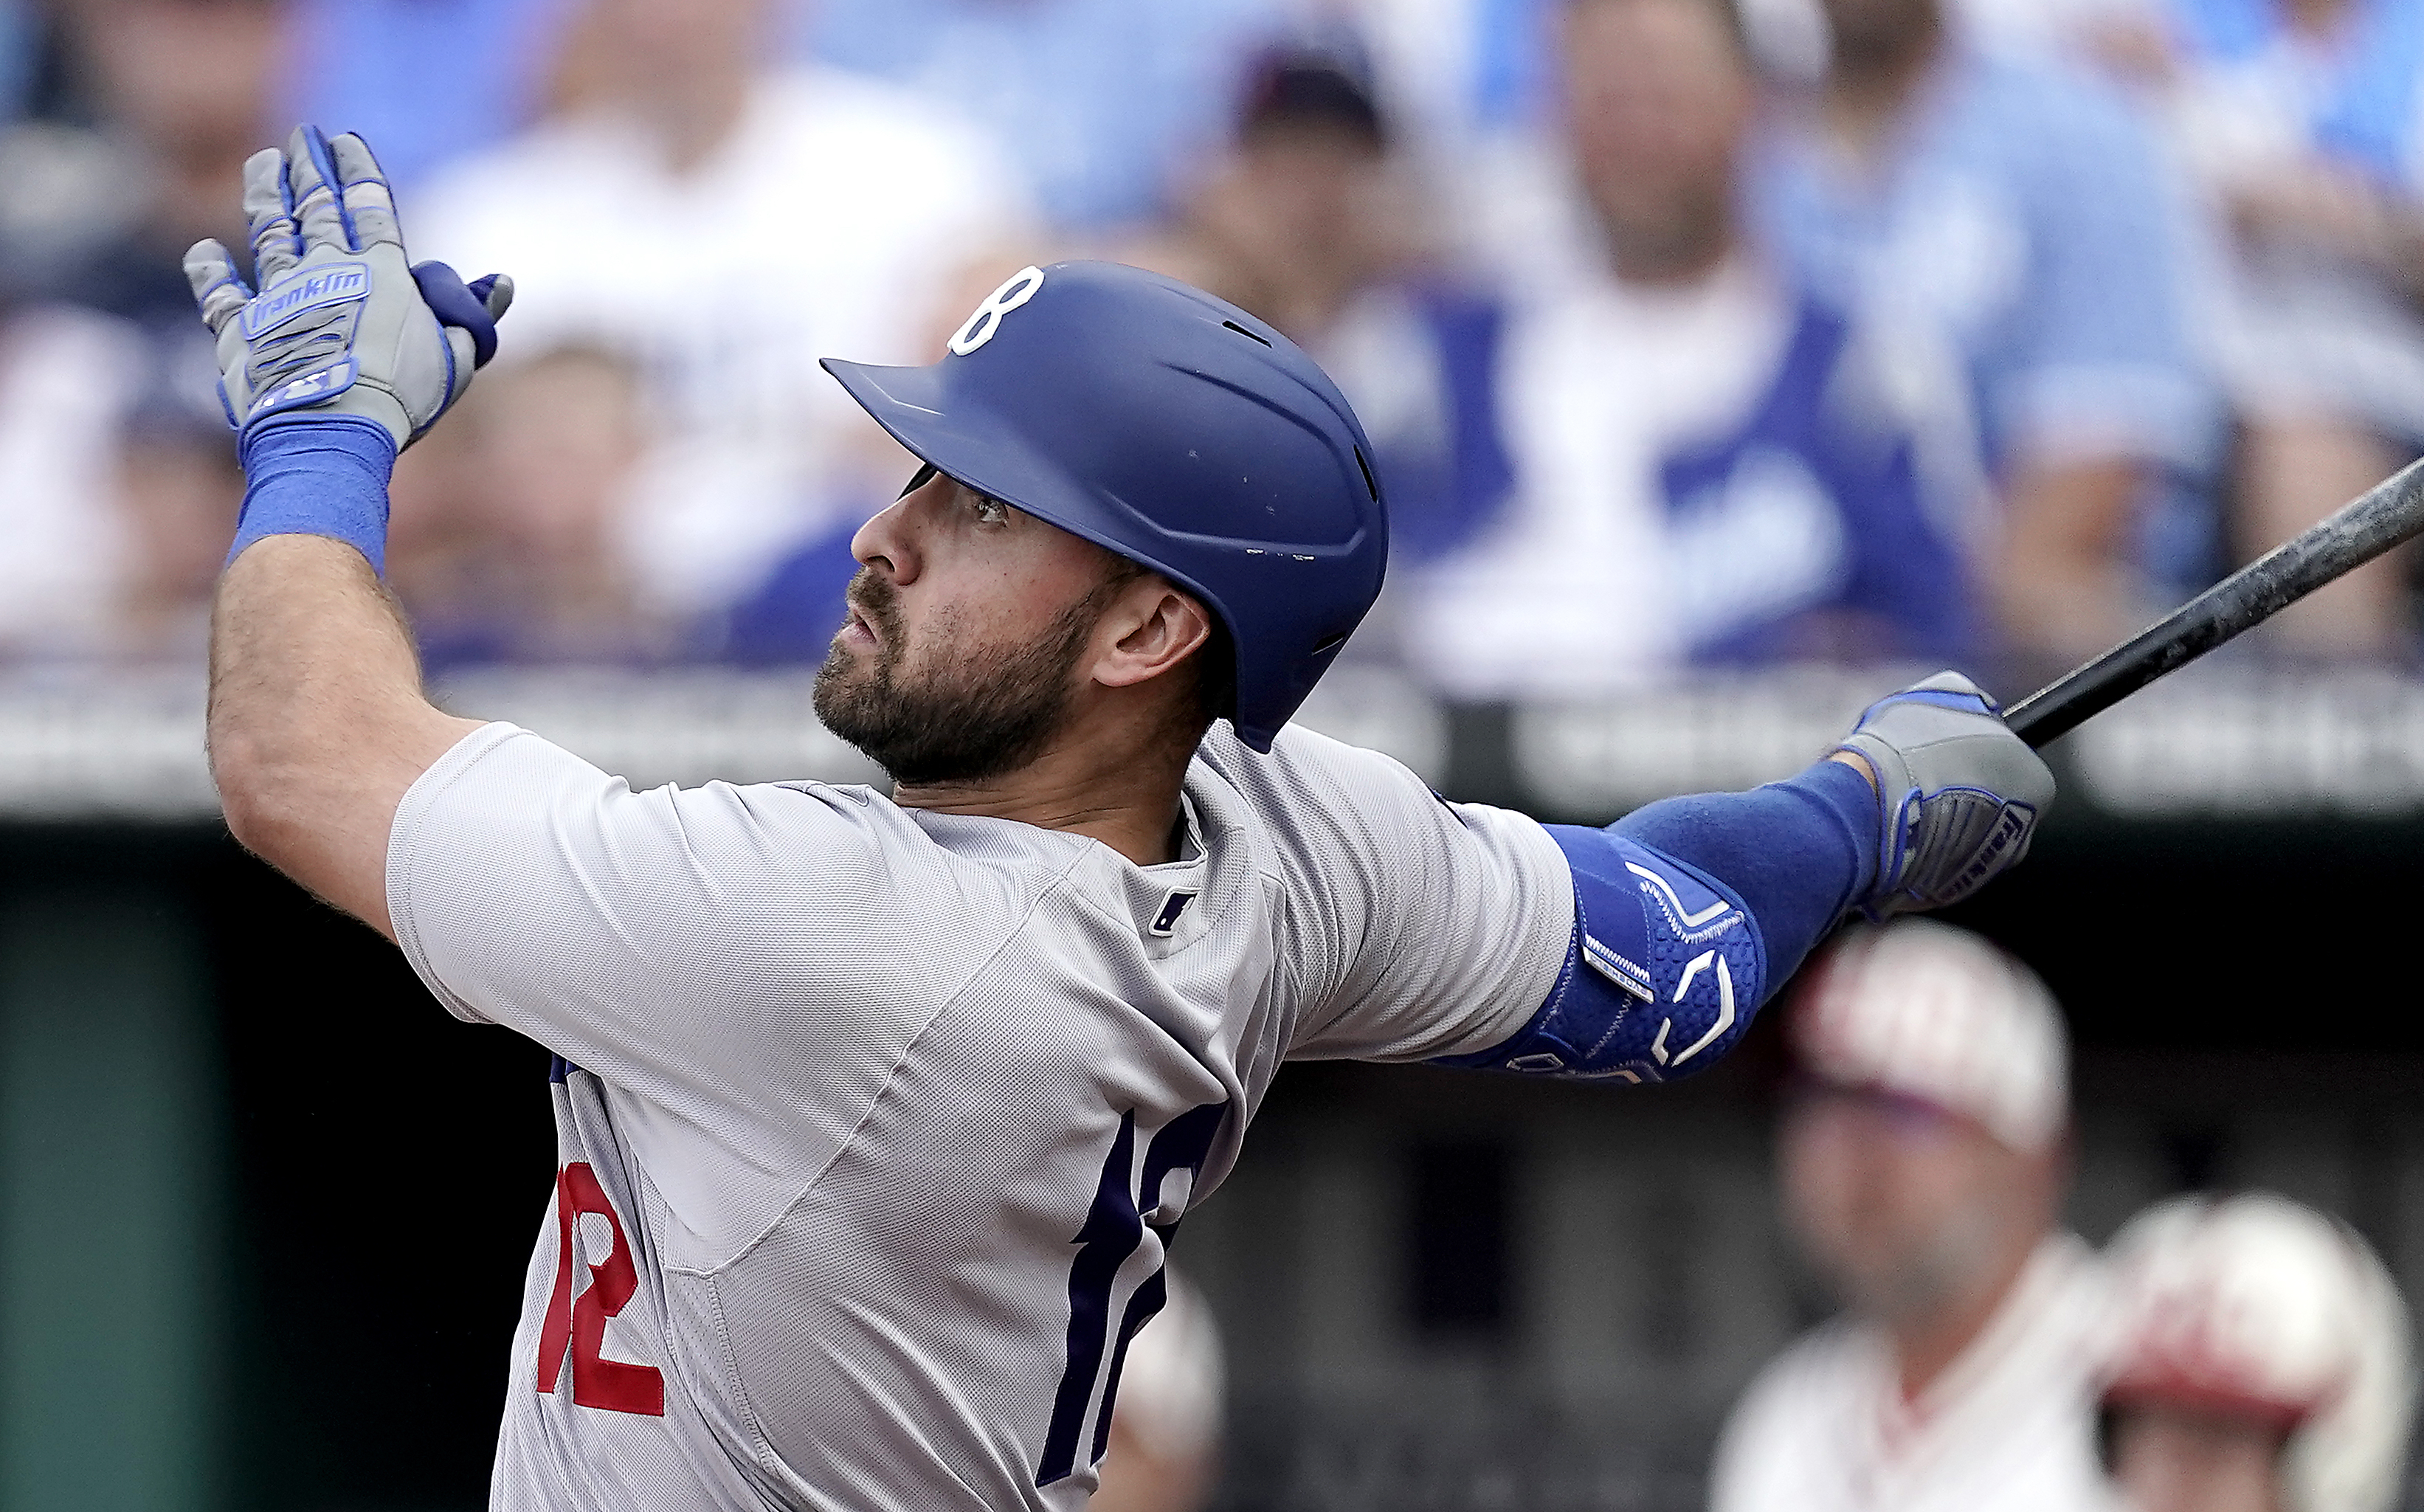 Don't look now, Yankees fans, but Joey Gallo is on fire with Dodgers 